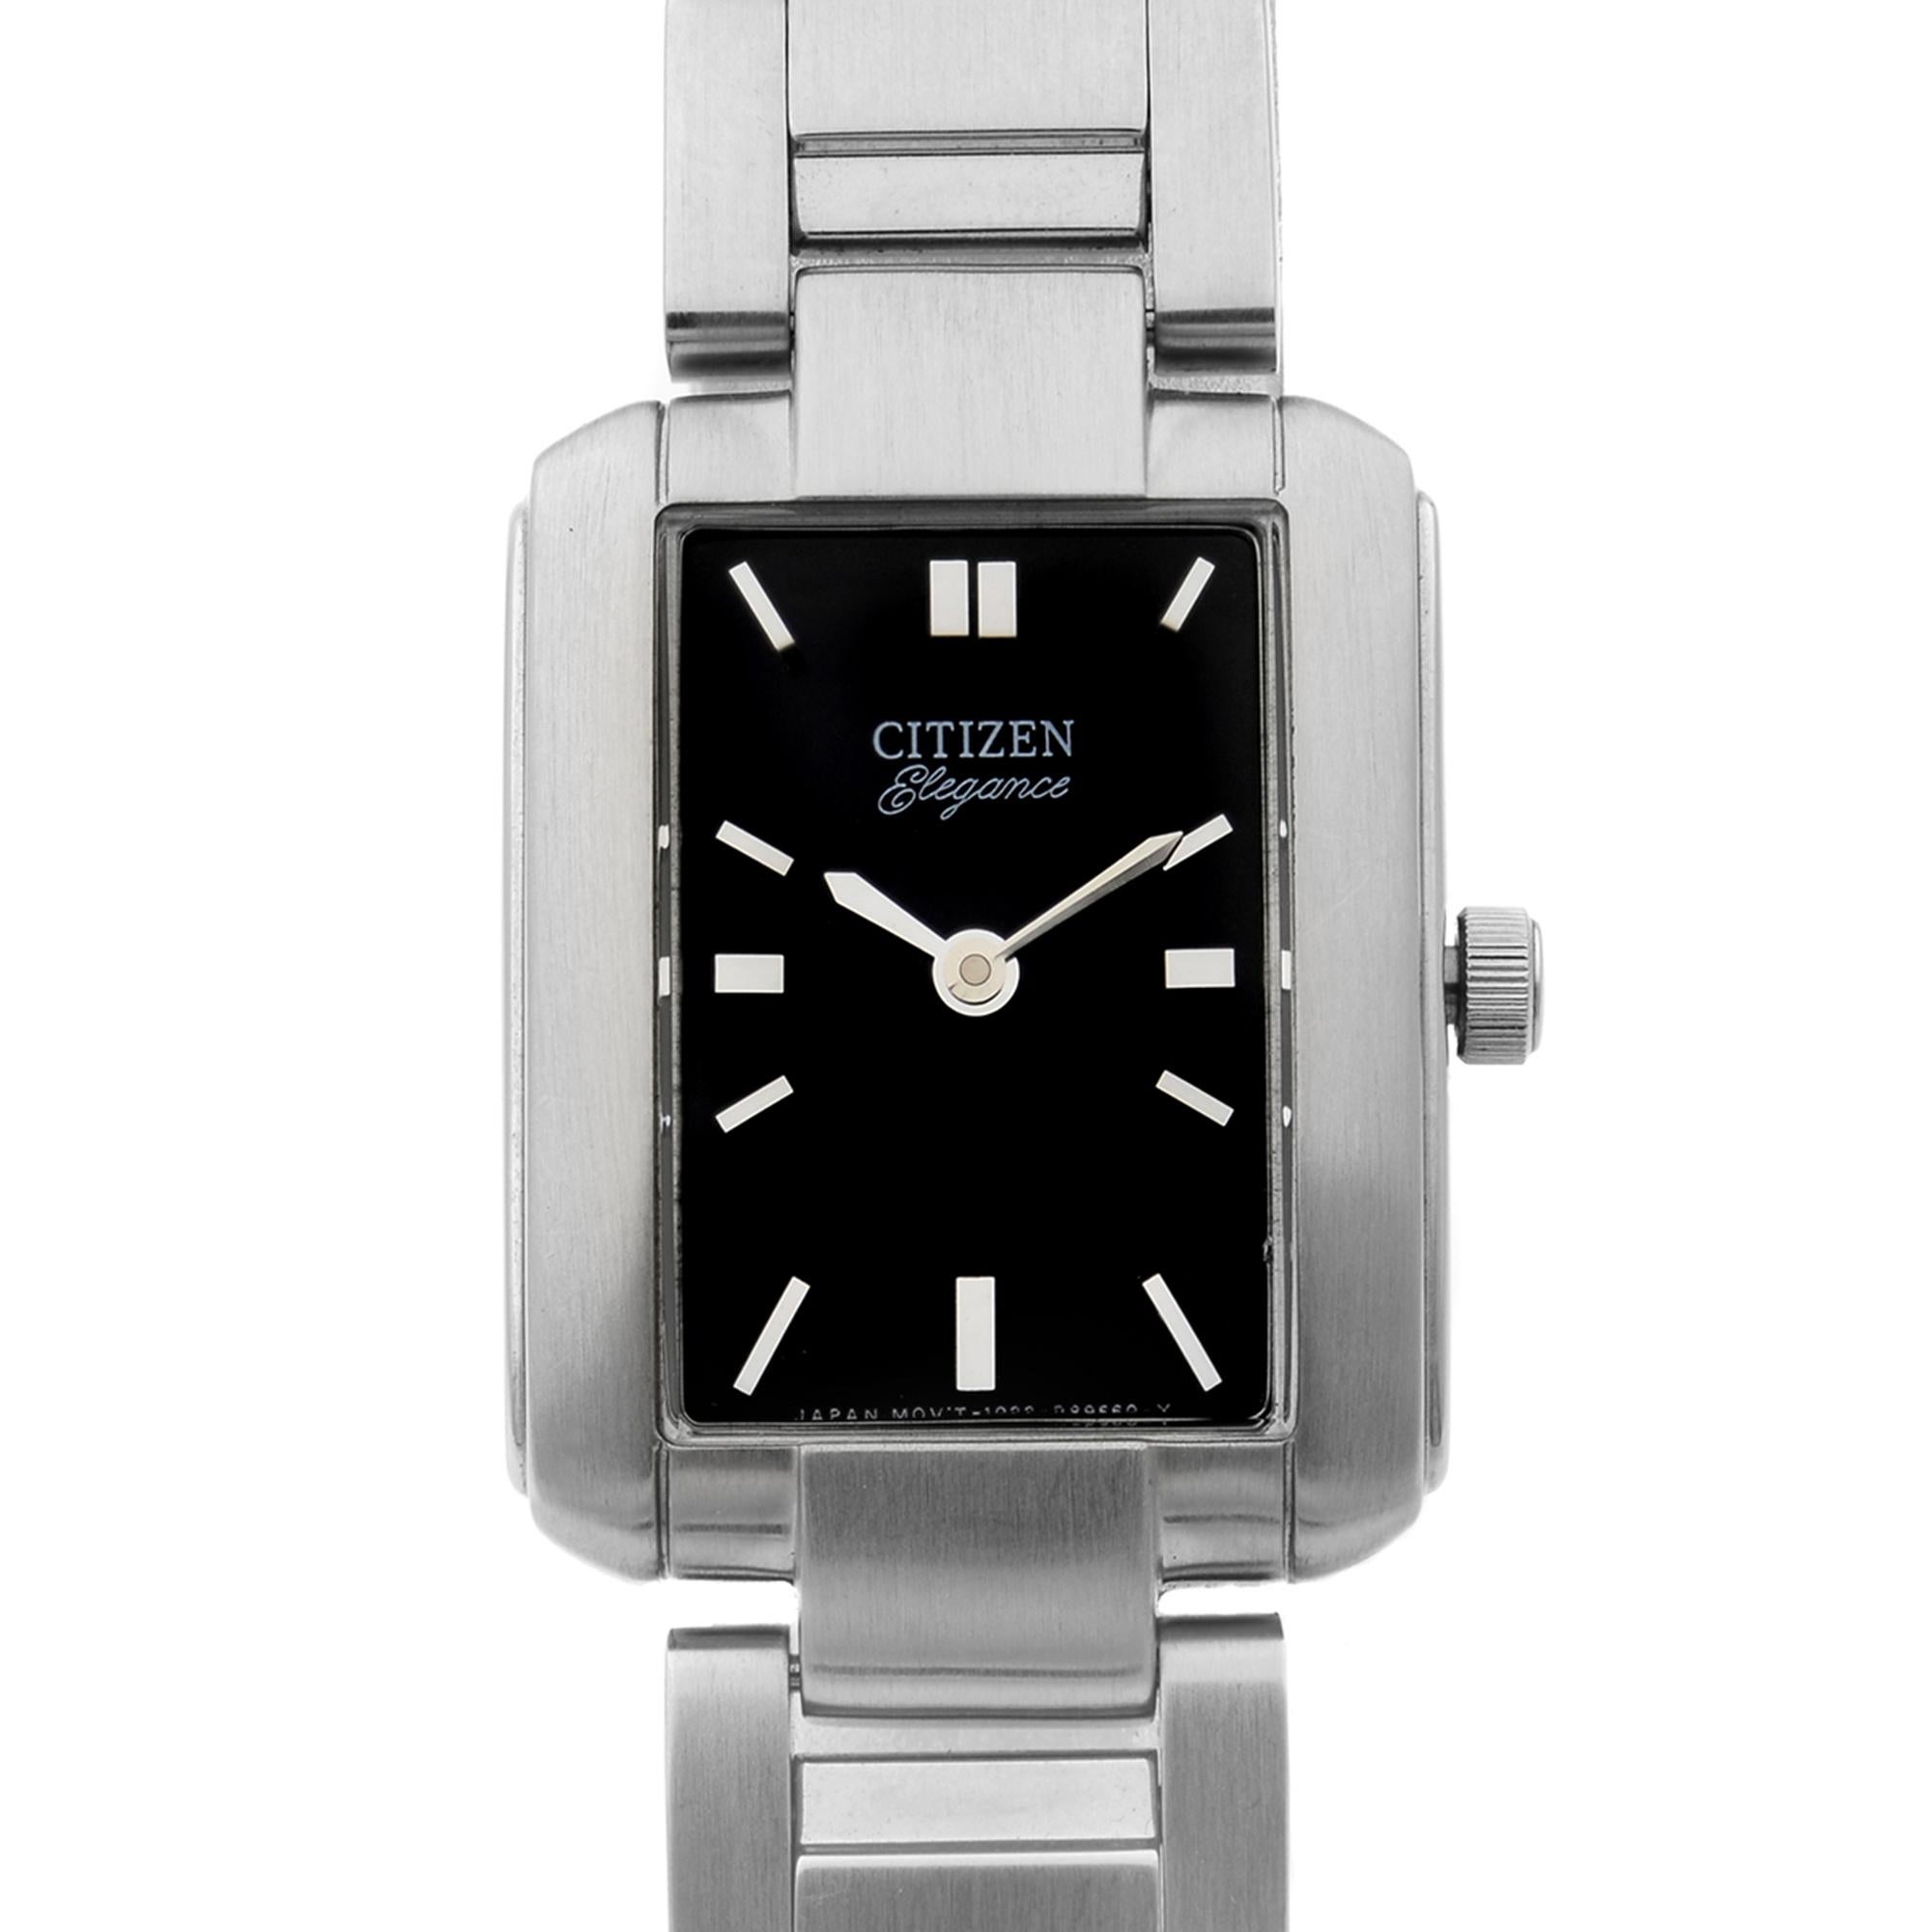 This Display Model Bulova 96R146 Watch is a beautiful women's timepiece that is powered by quartz (battery) movement which is cased in a stainless steel case. It has a Rectangle shape face and has hand sticks style markers. It is completed with a